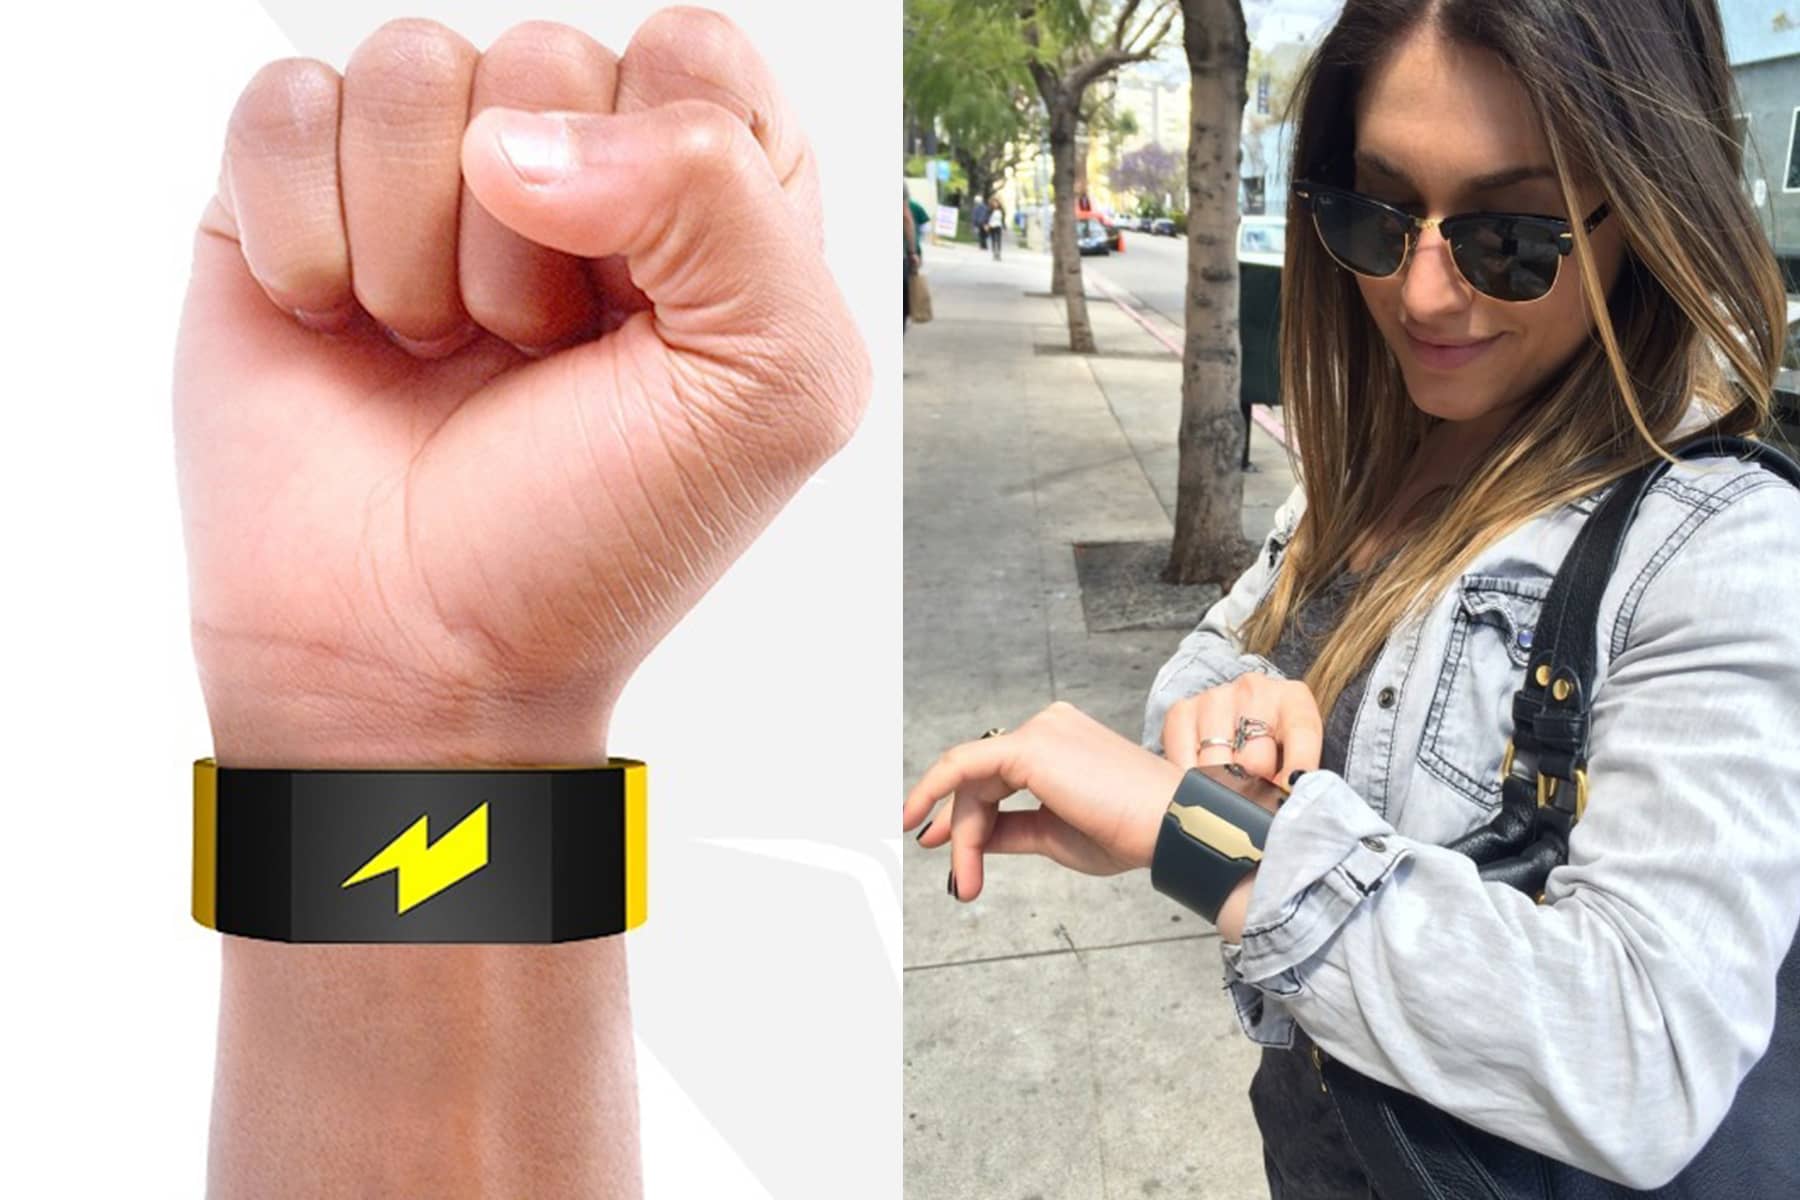 Electric shock wristband claims to zap bad habits away | CTV News